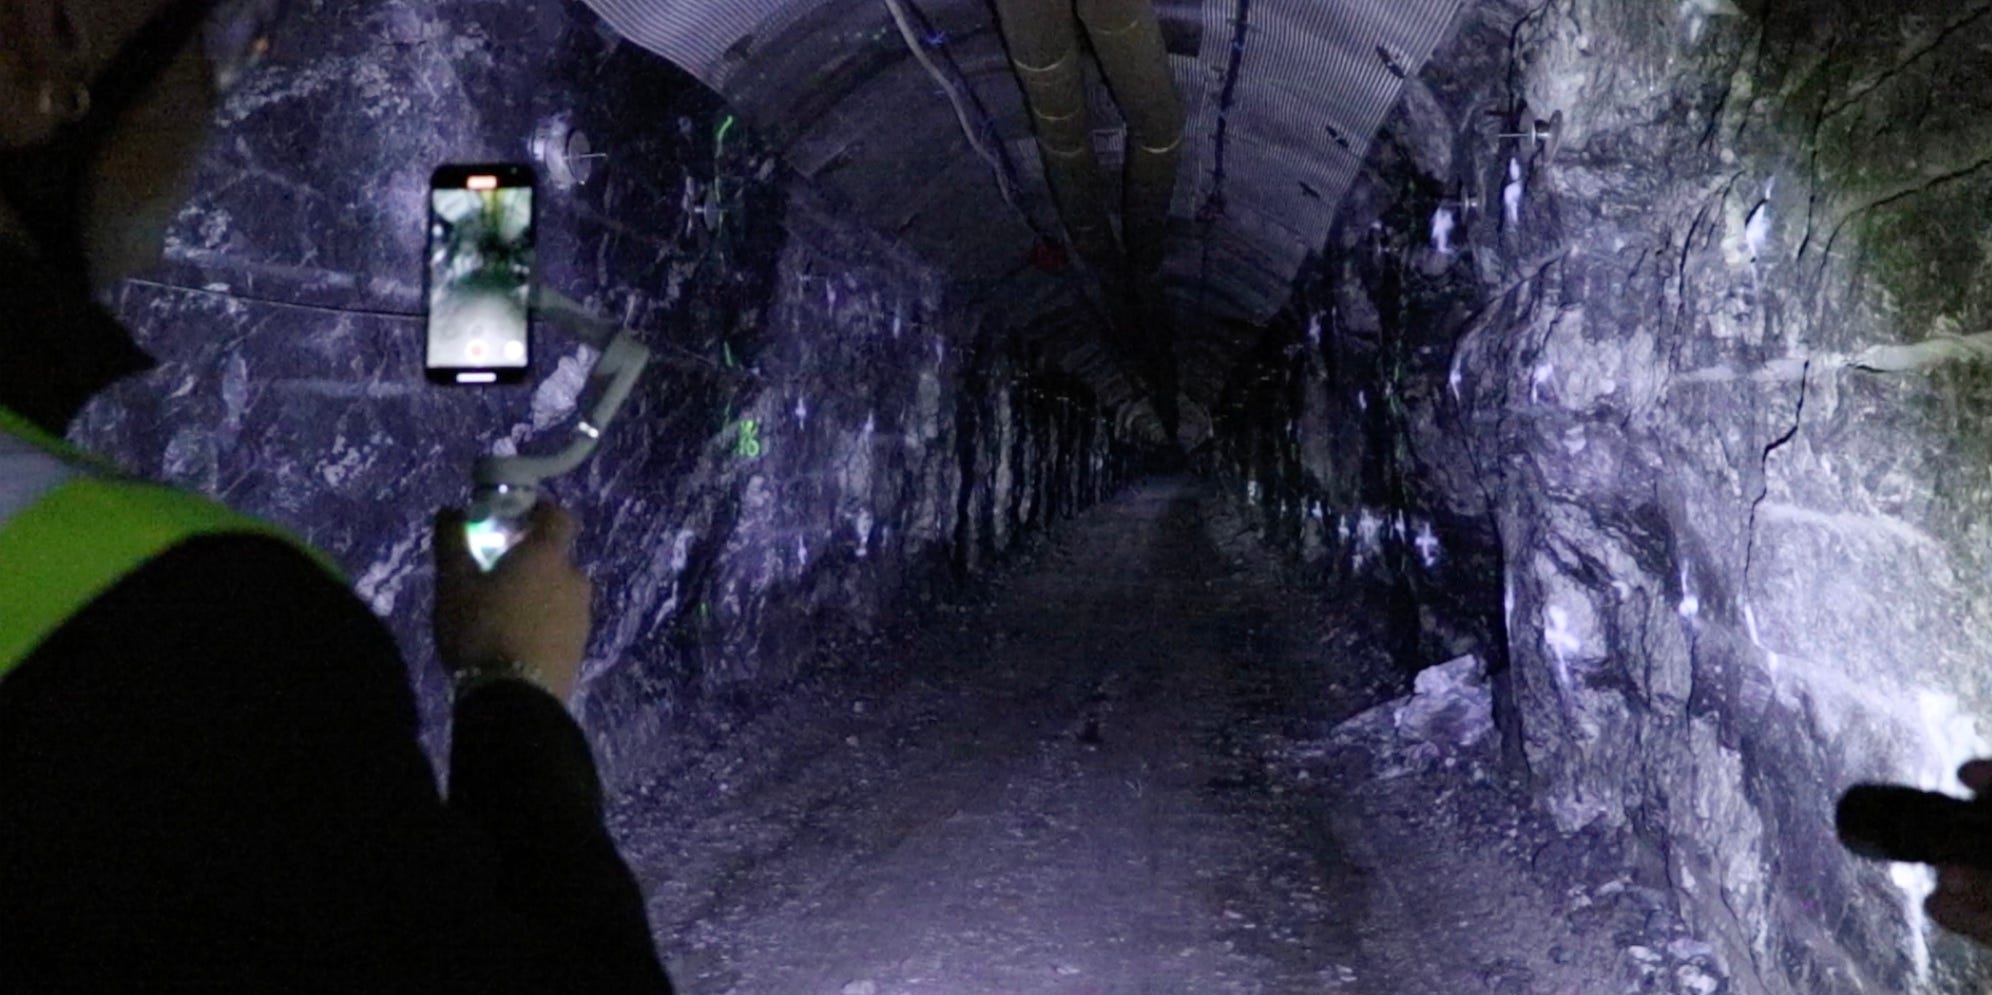 A storage tunnel is shown in the picture